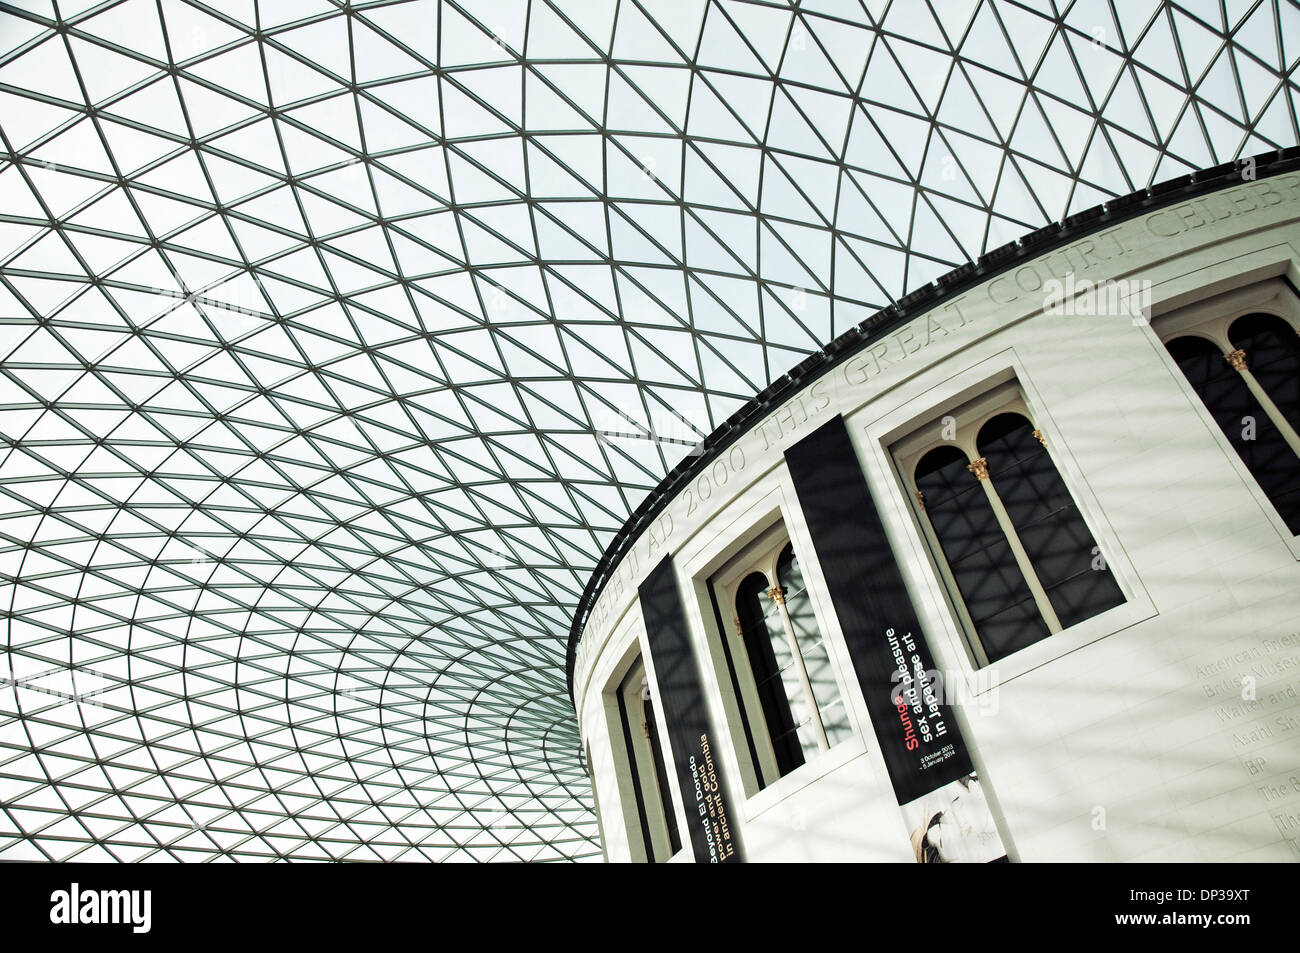 The patterned modern glass ceiling / roof of the British Museum, London ...